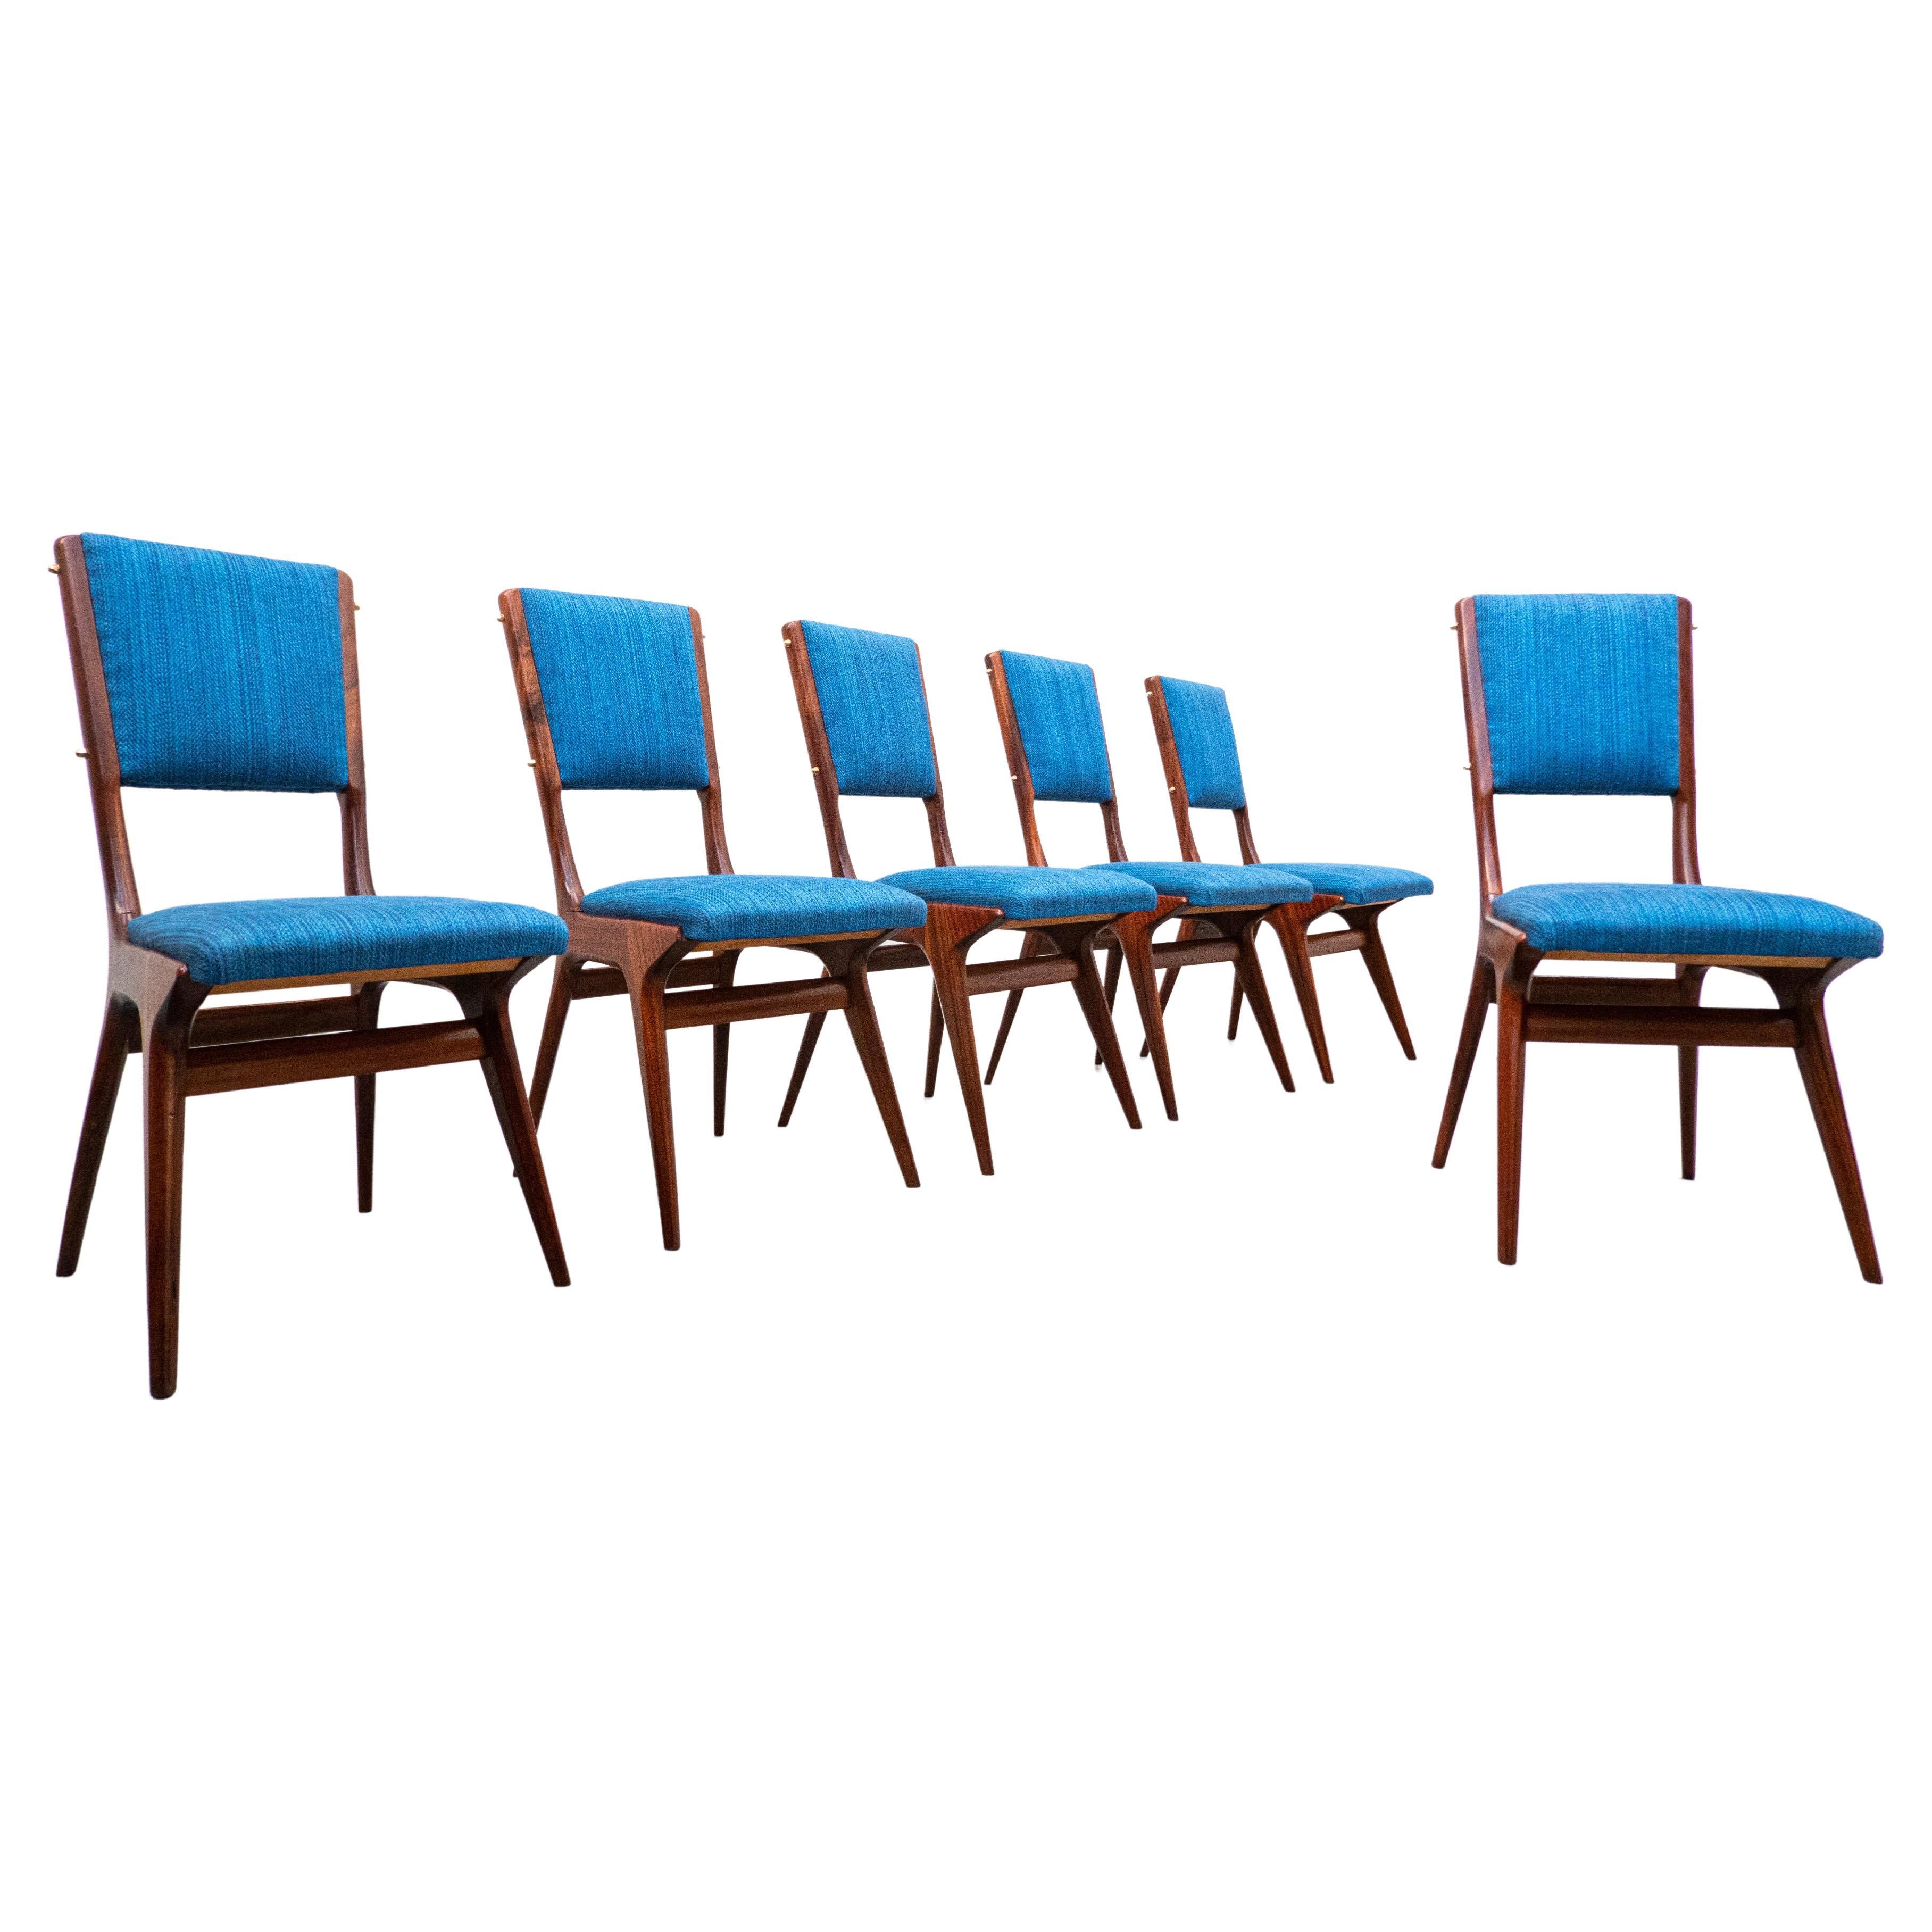 Set of 6 Blue Chairs Model 634 by Carlo de Carli for Cassina, Italy, 1950s